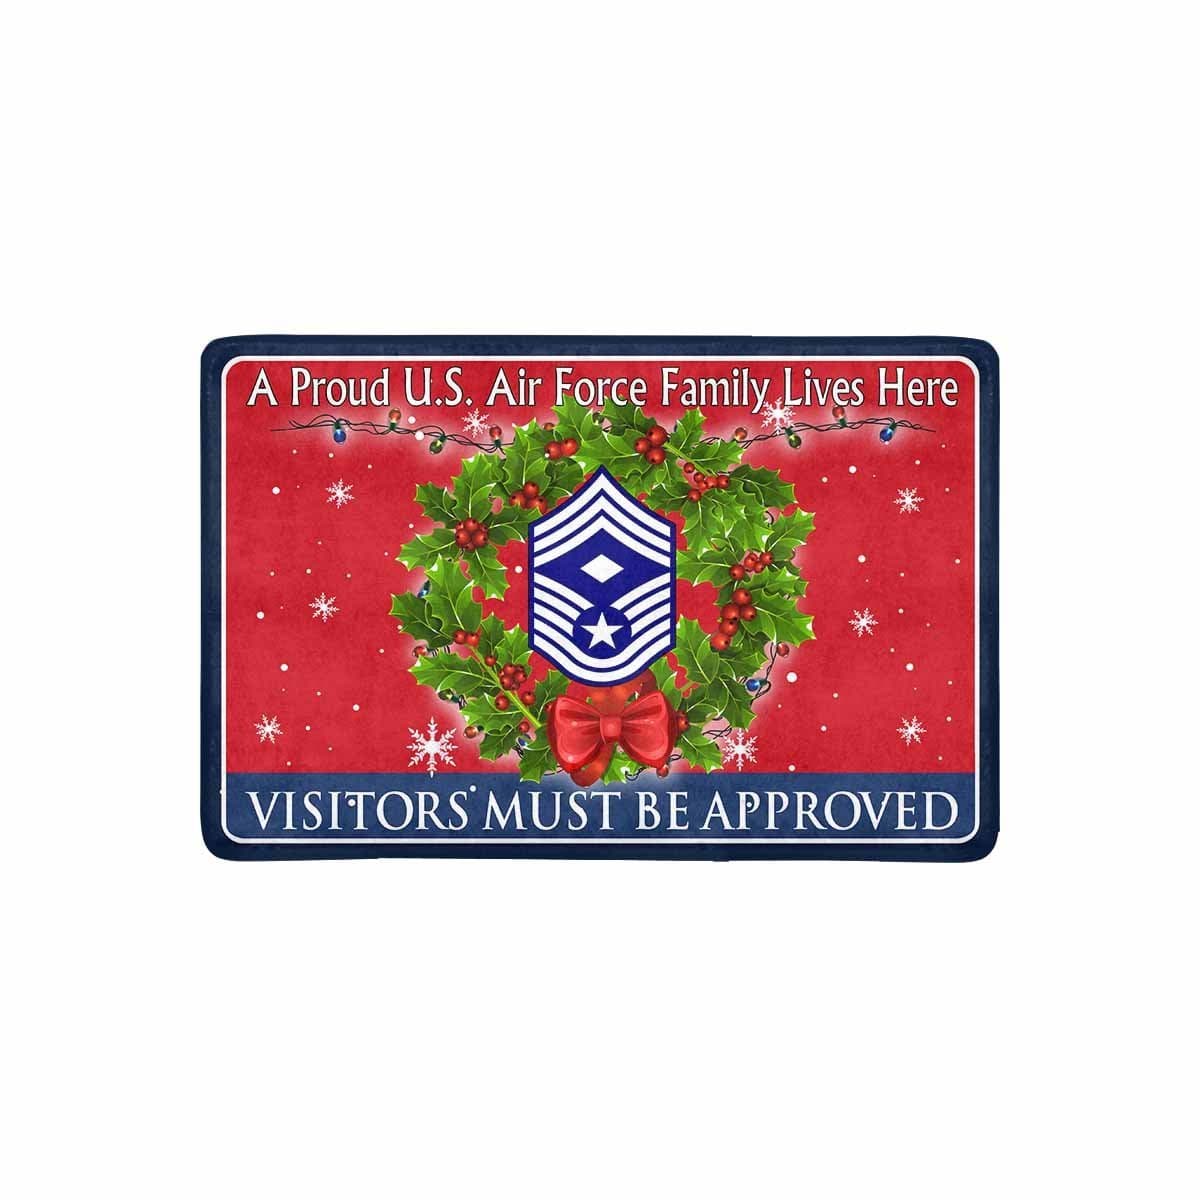 US Air Force E-9 First sergeant E-9 Rank - Visitors must be approved-Doormat-USAF-Ranks-Veterans Nation